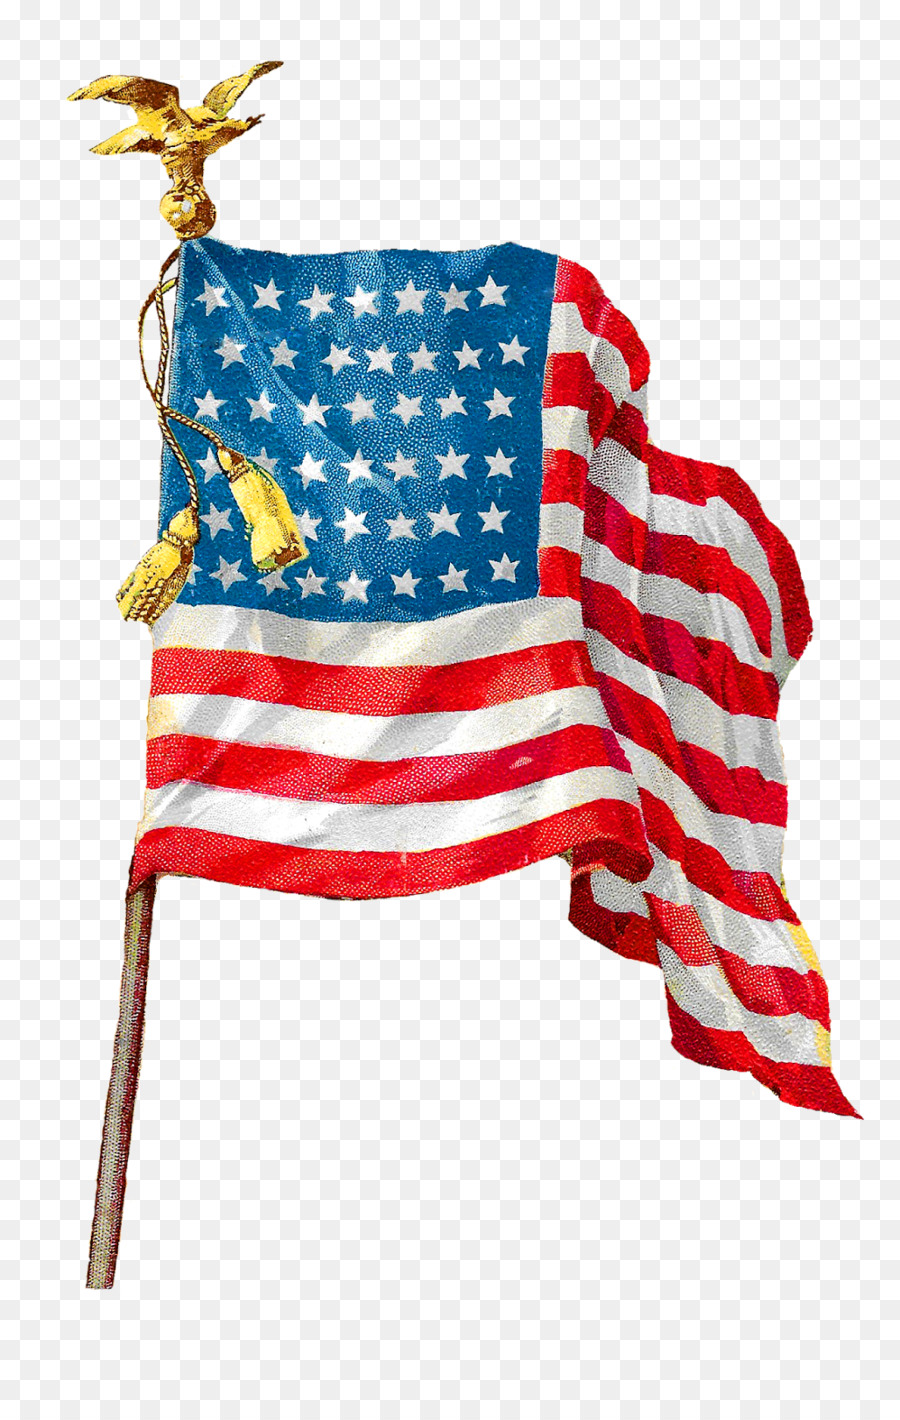 Flag of the United States Art Clip art - american flag png download - 1028*1600 - Free Transparent United States png Download.